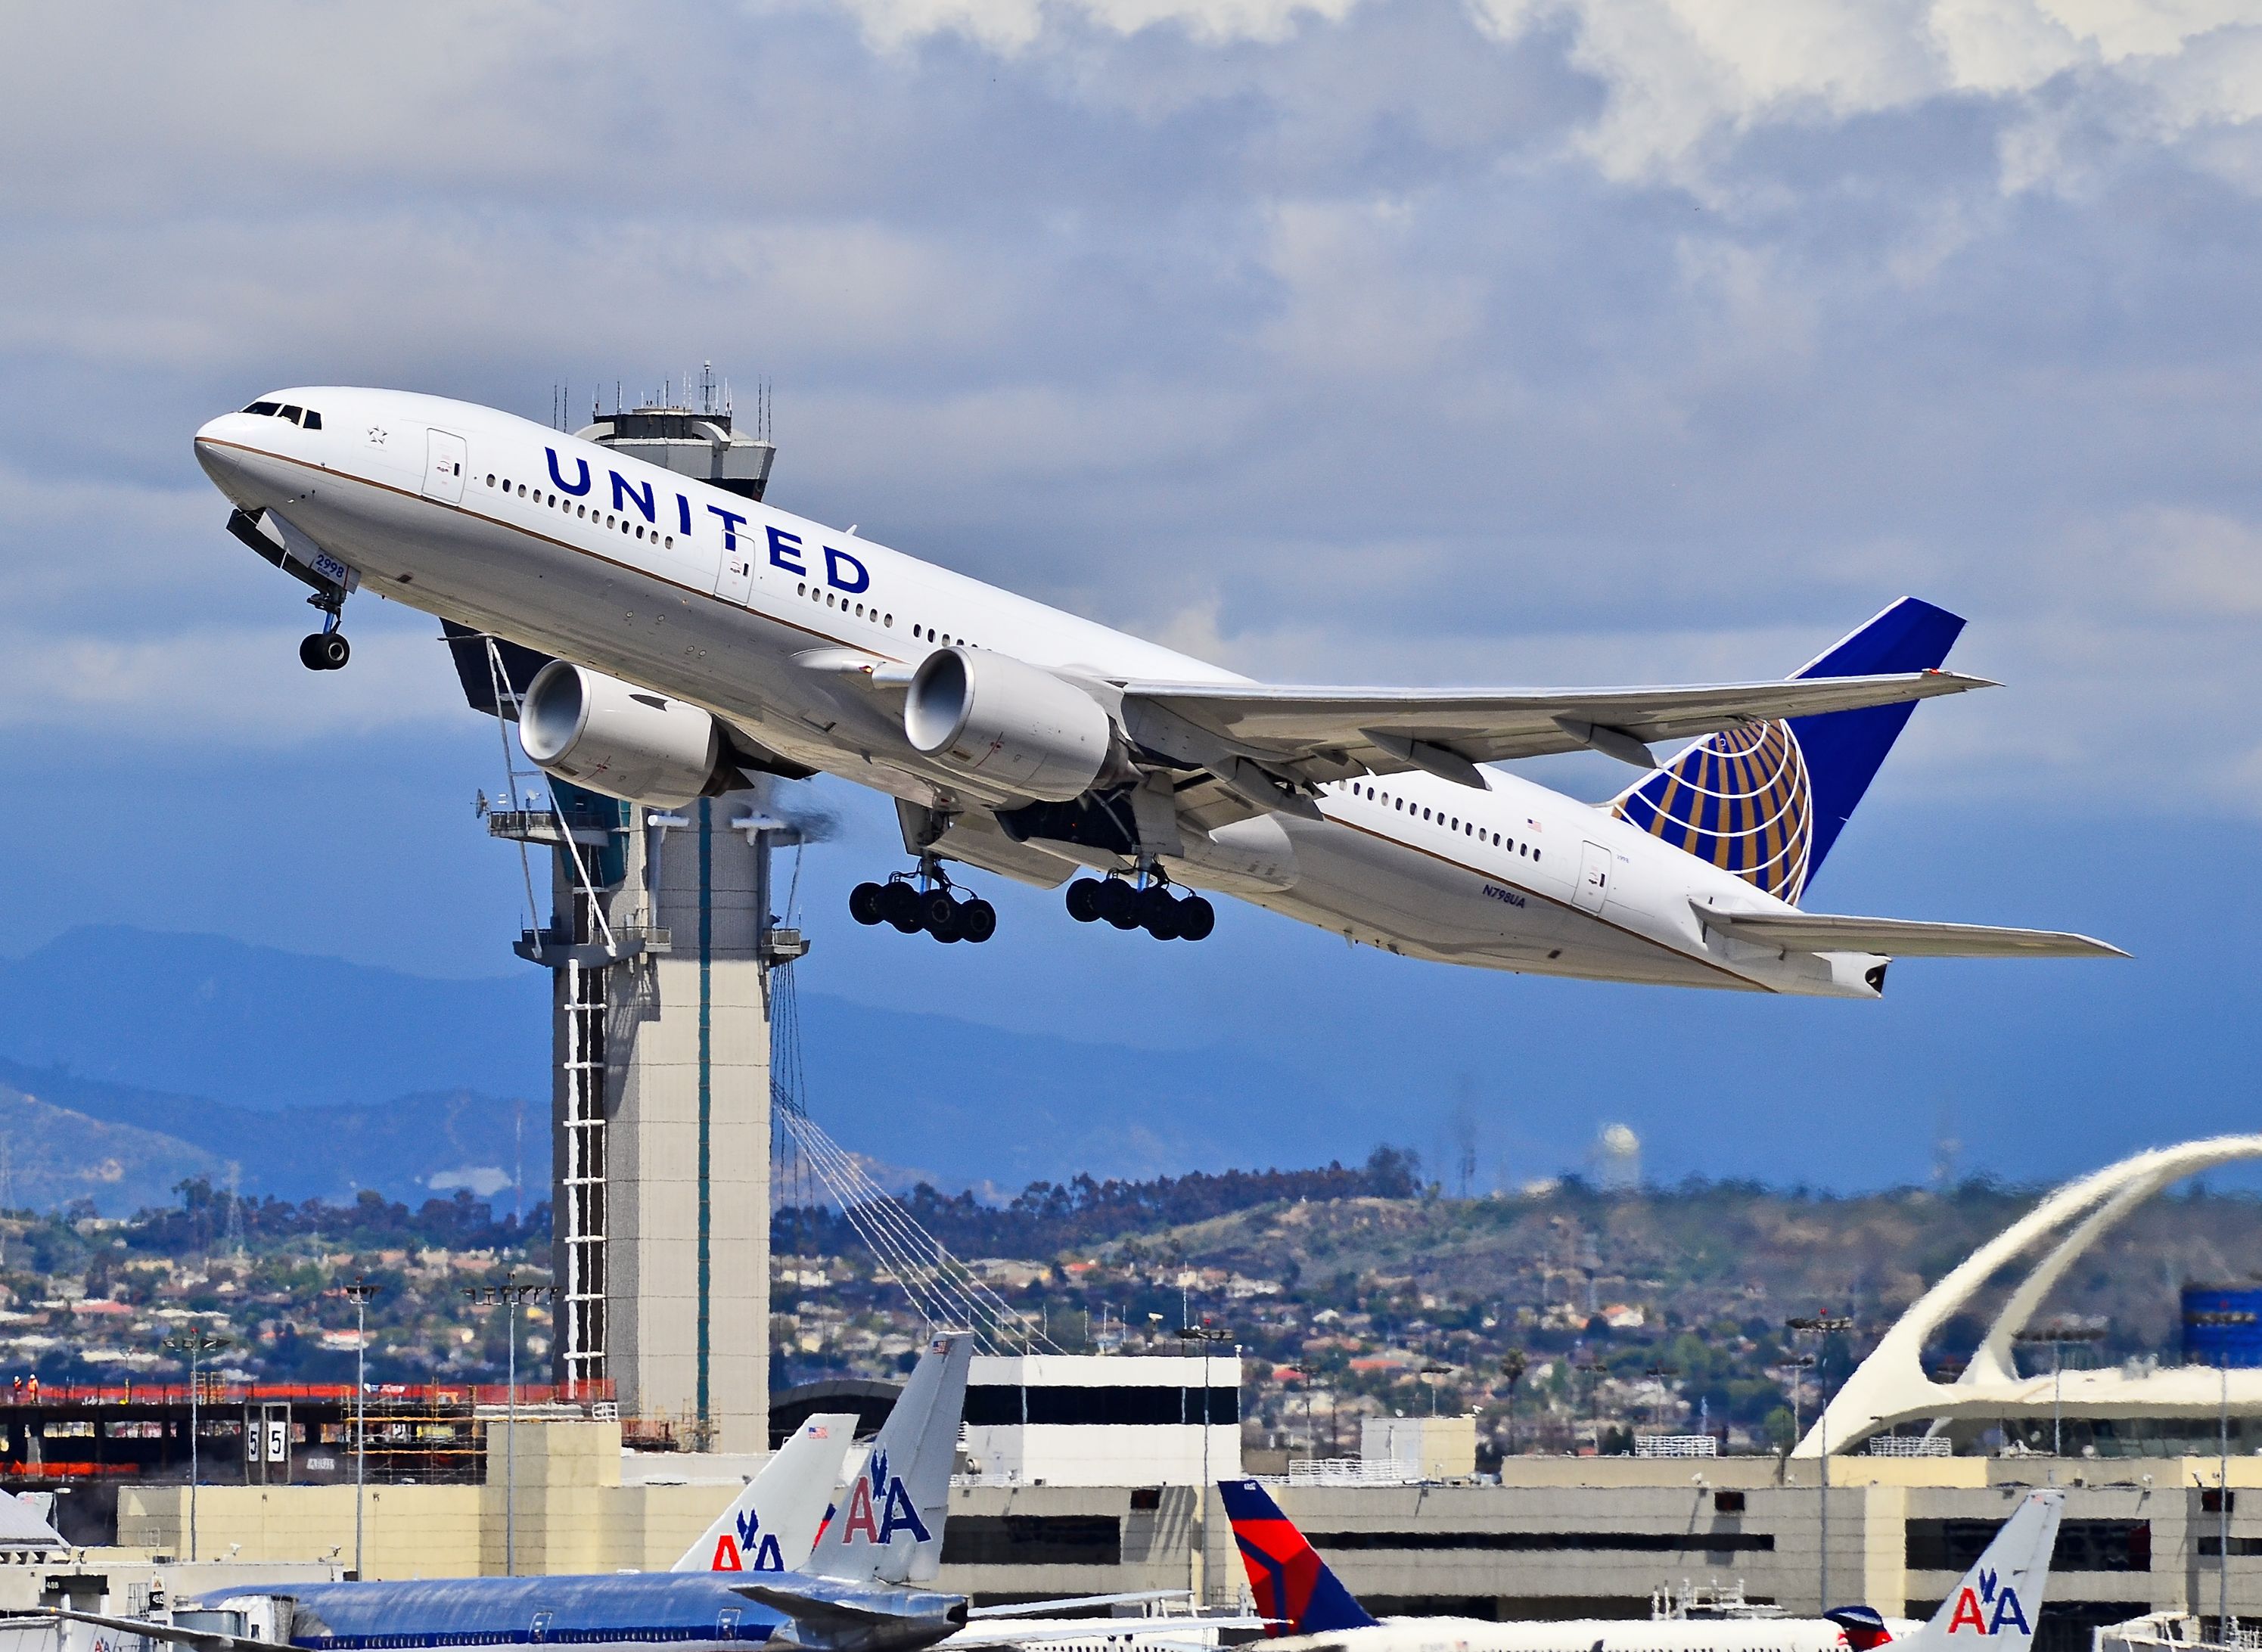 A United Airlines Boeing 777-200ER taking off from LAX.